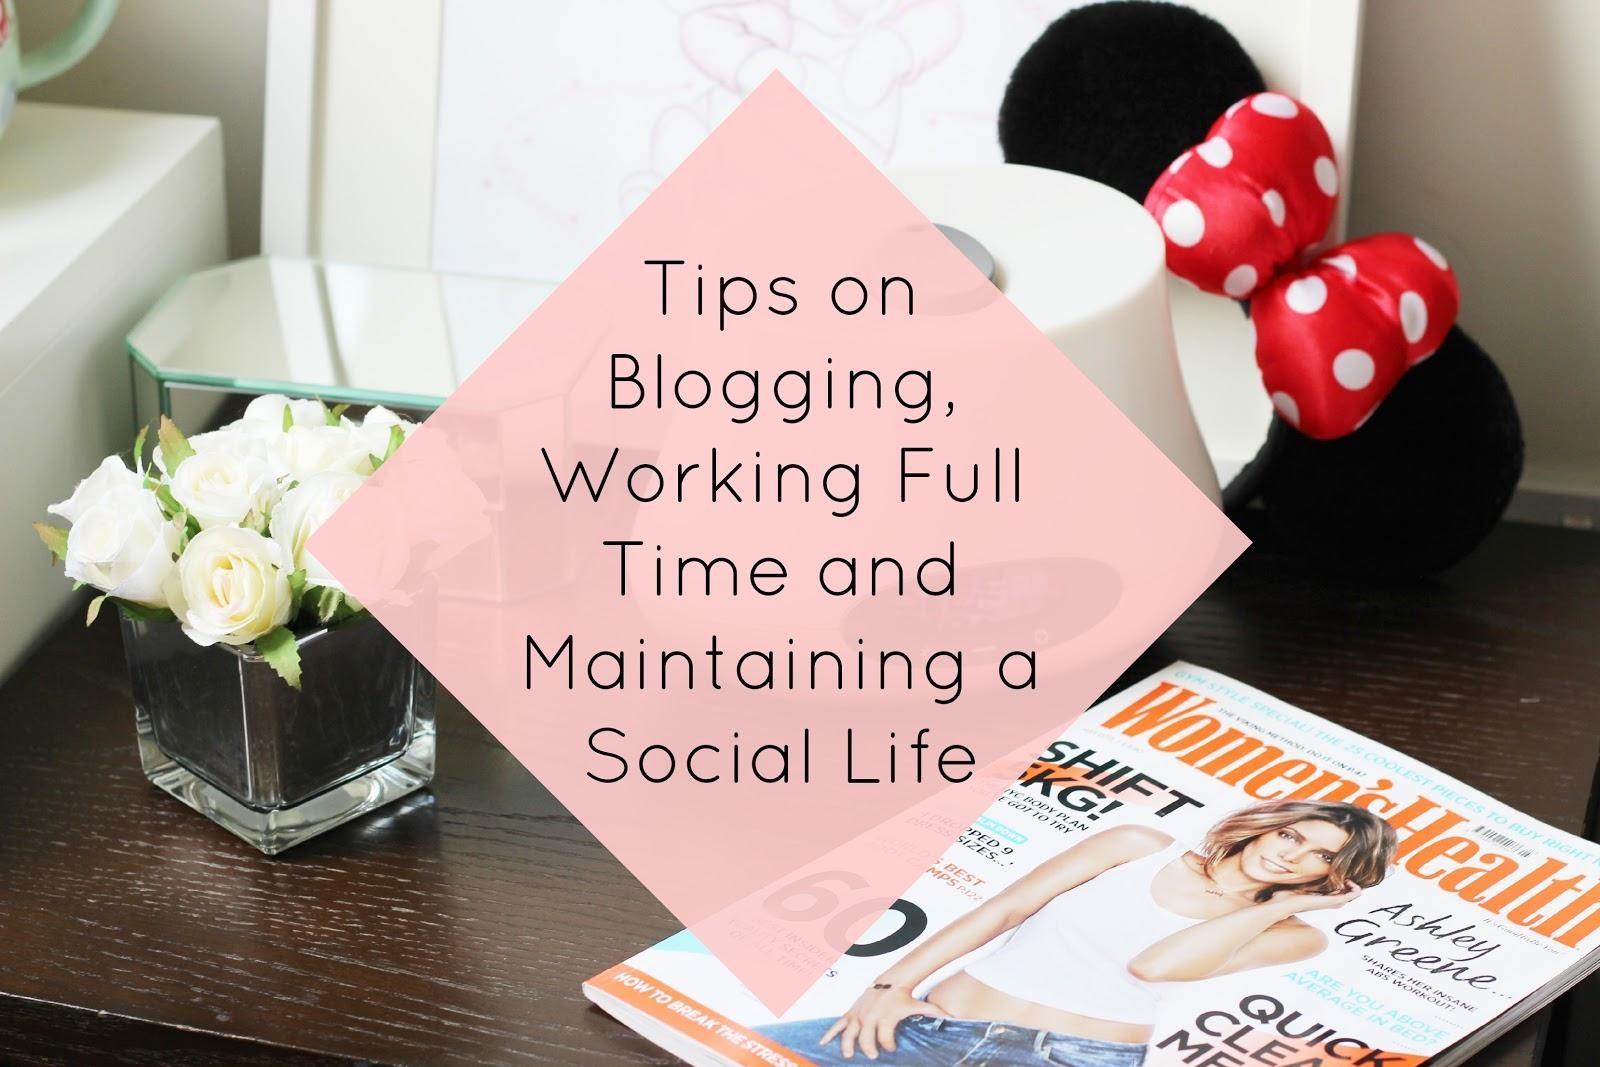 Tips on Blogging, Working Full Time and Maintaining a Social Life